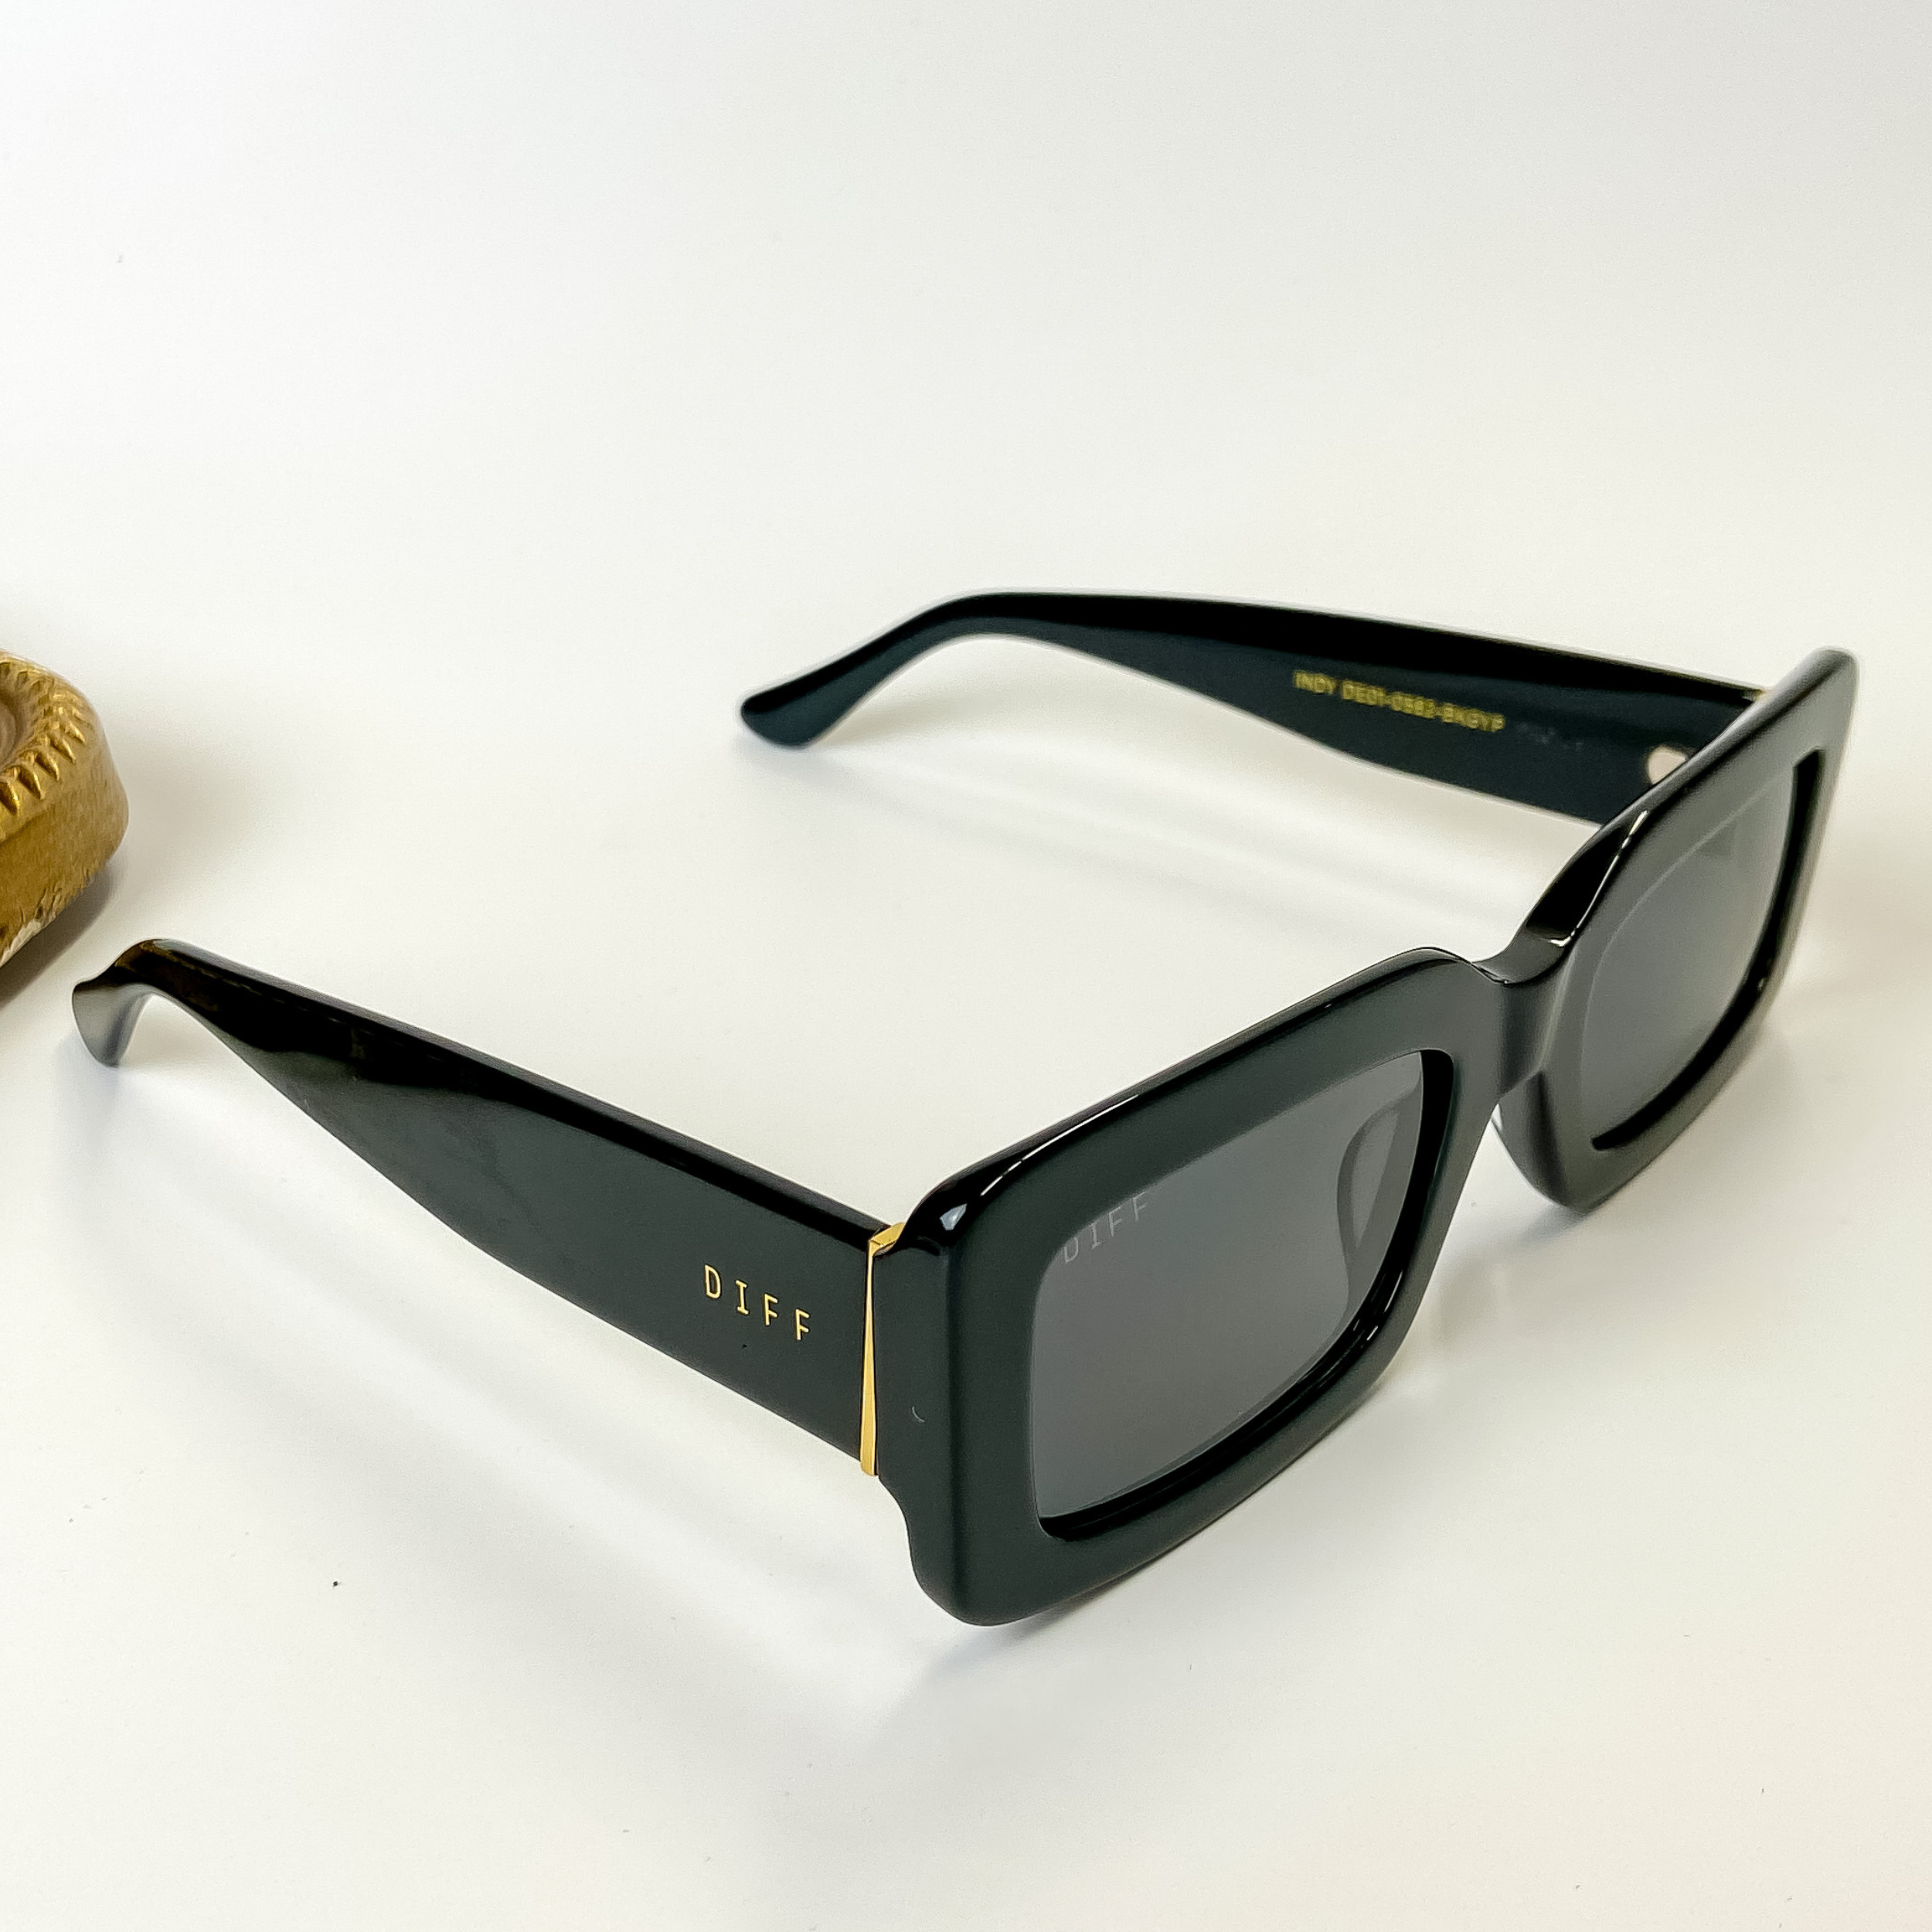 A pair of black sunglasses with rectangle lenses. Pictured on a white background with gold jewelry.